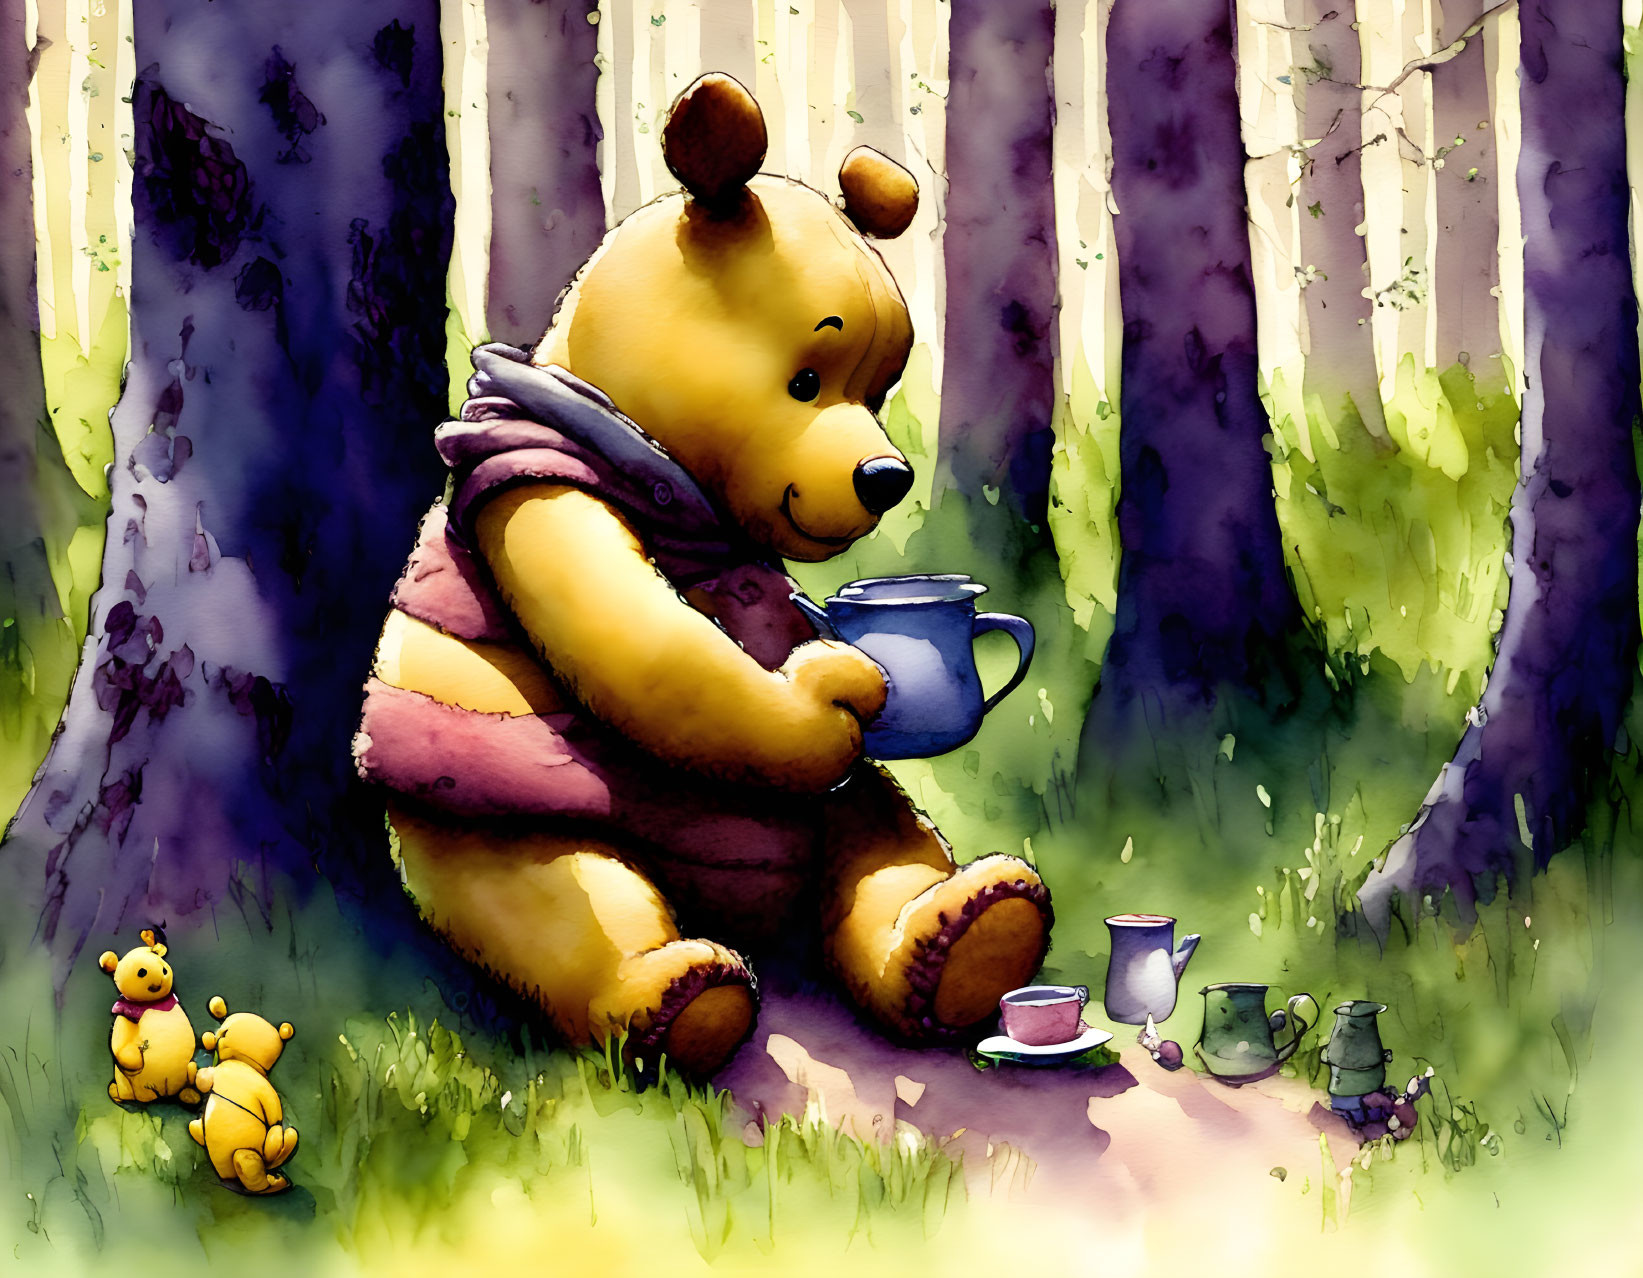 Illustration of Winnie the Pooh with toy bear in forest clearing